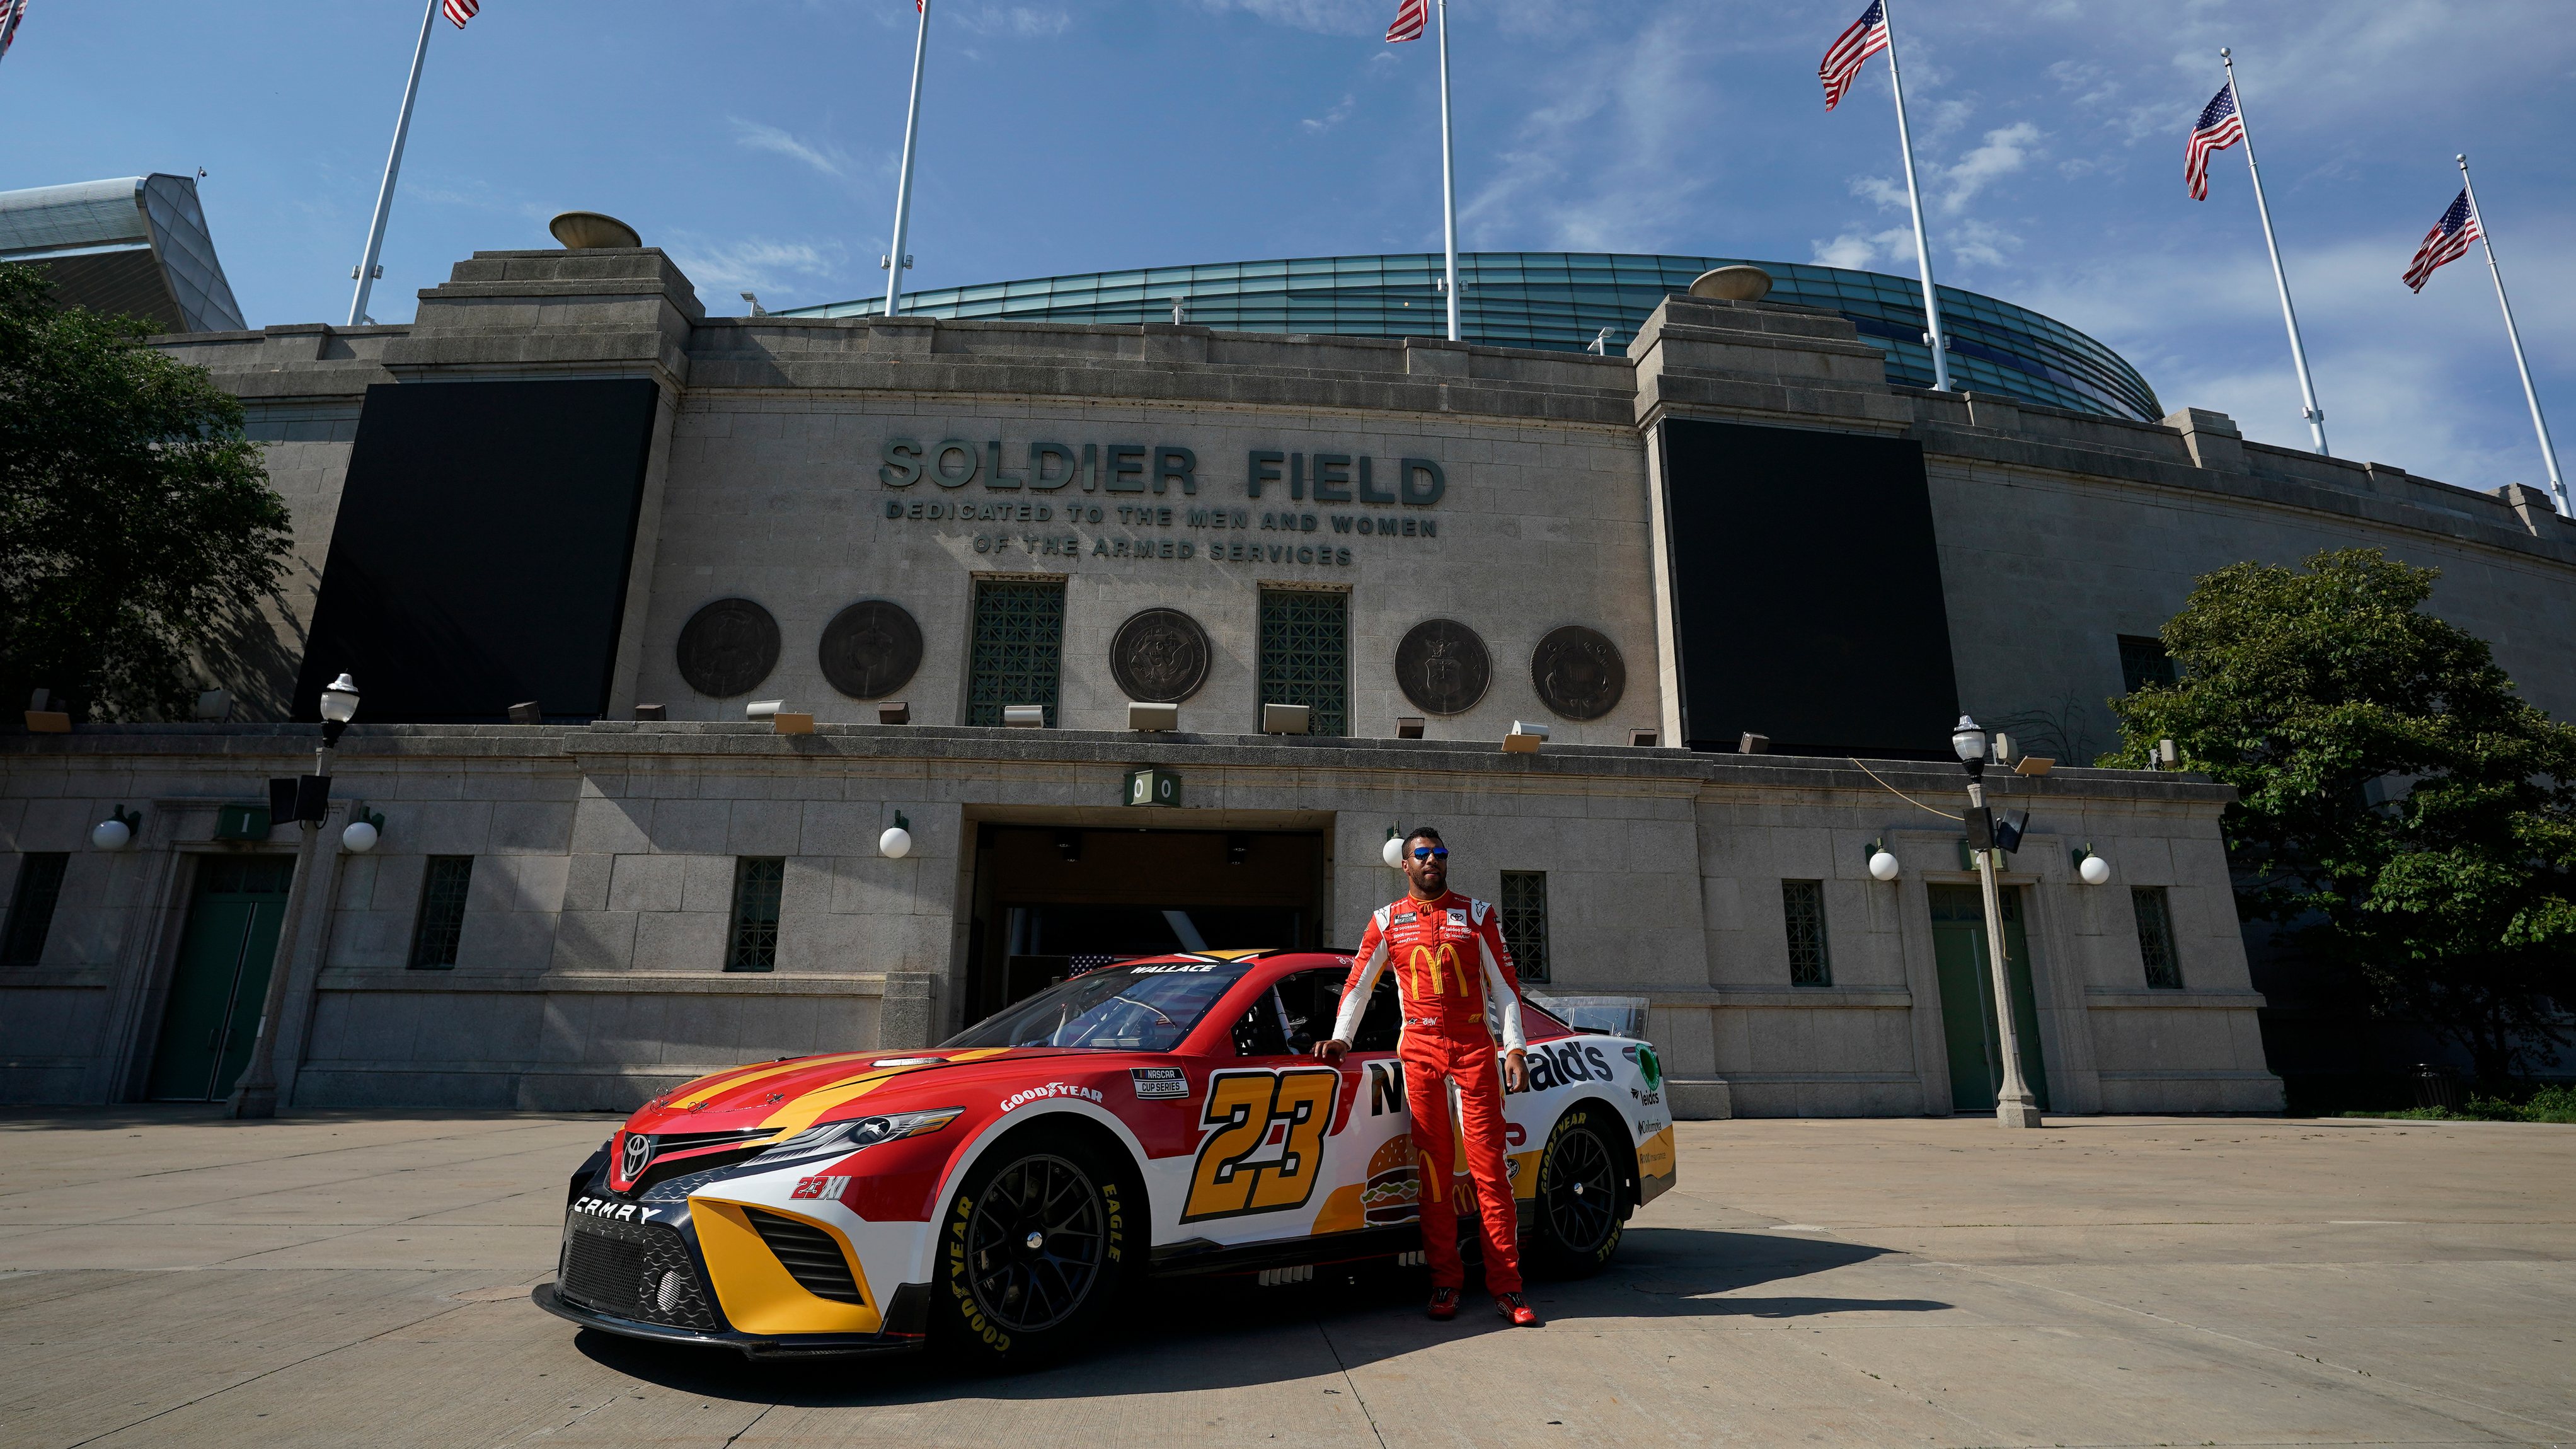 Excitement builds ahead of NASCAR Chicago Street Race